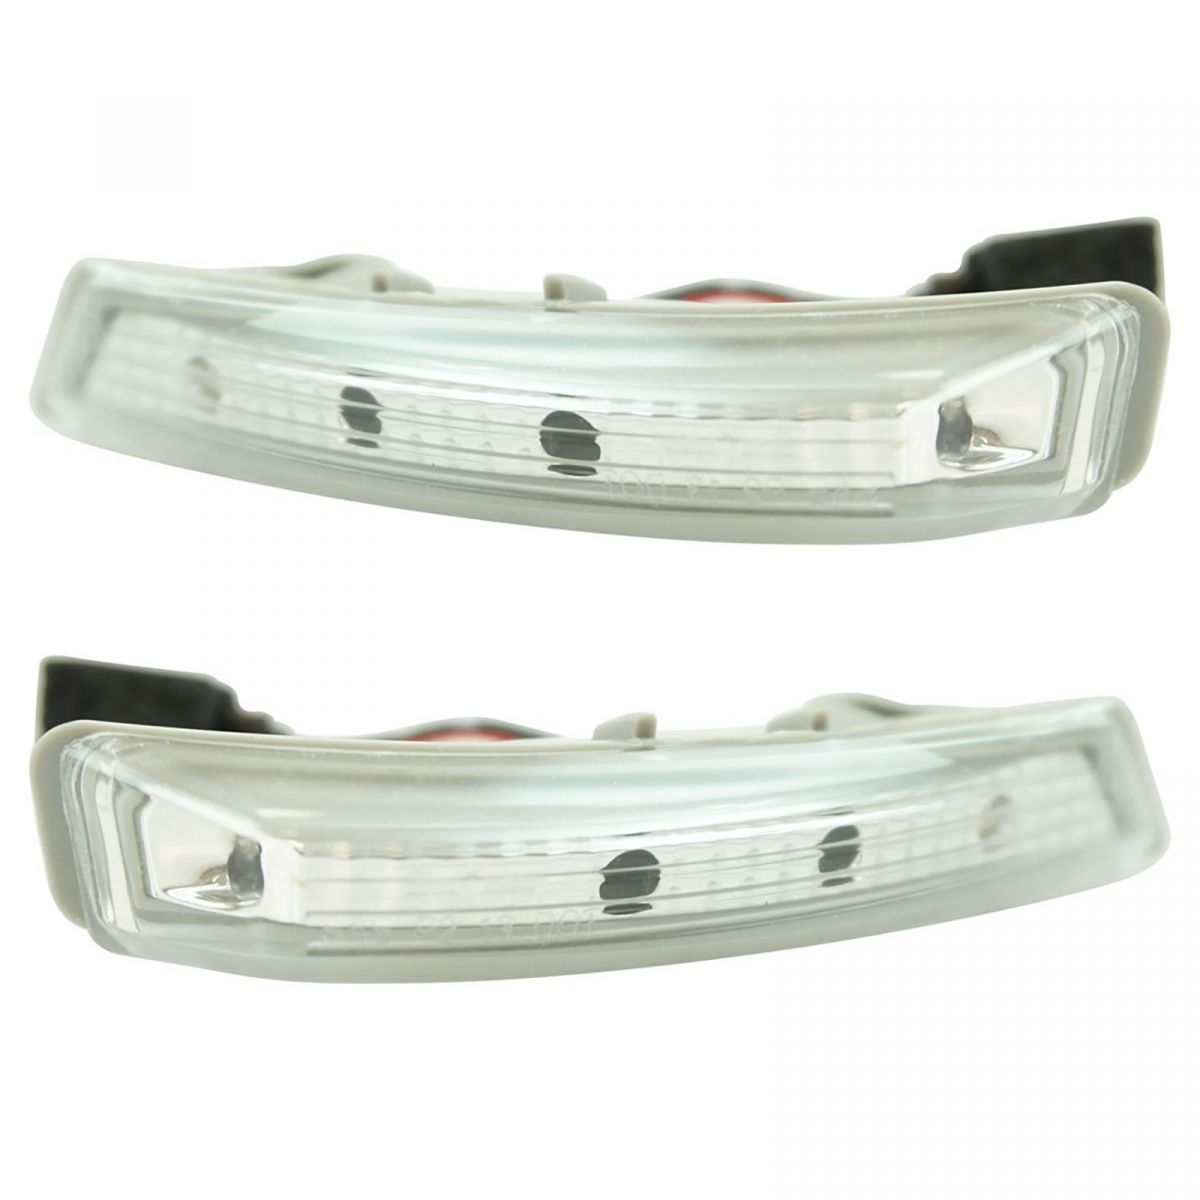 Dorman Mirror LED Turn Signal Light LH RH Pair for Grand Caravan Town & Country | eBay 2015 Town And Country Turn Signal Bulb